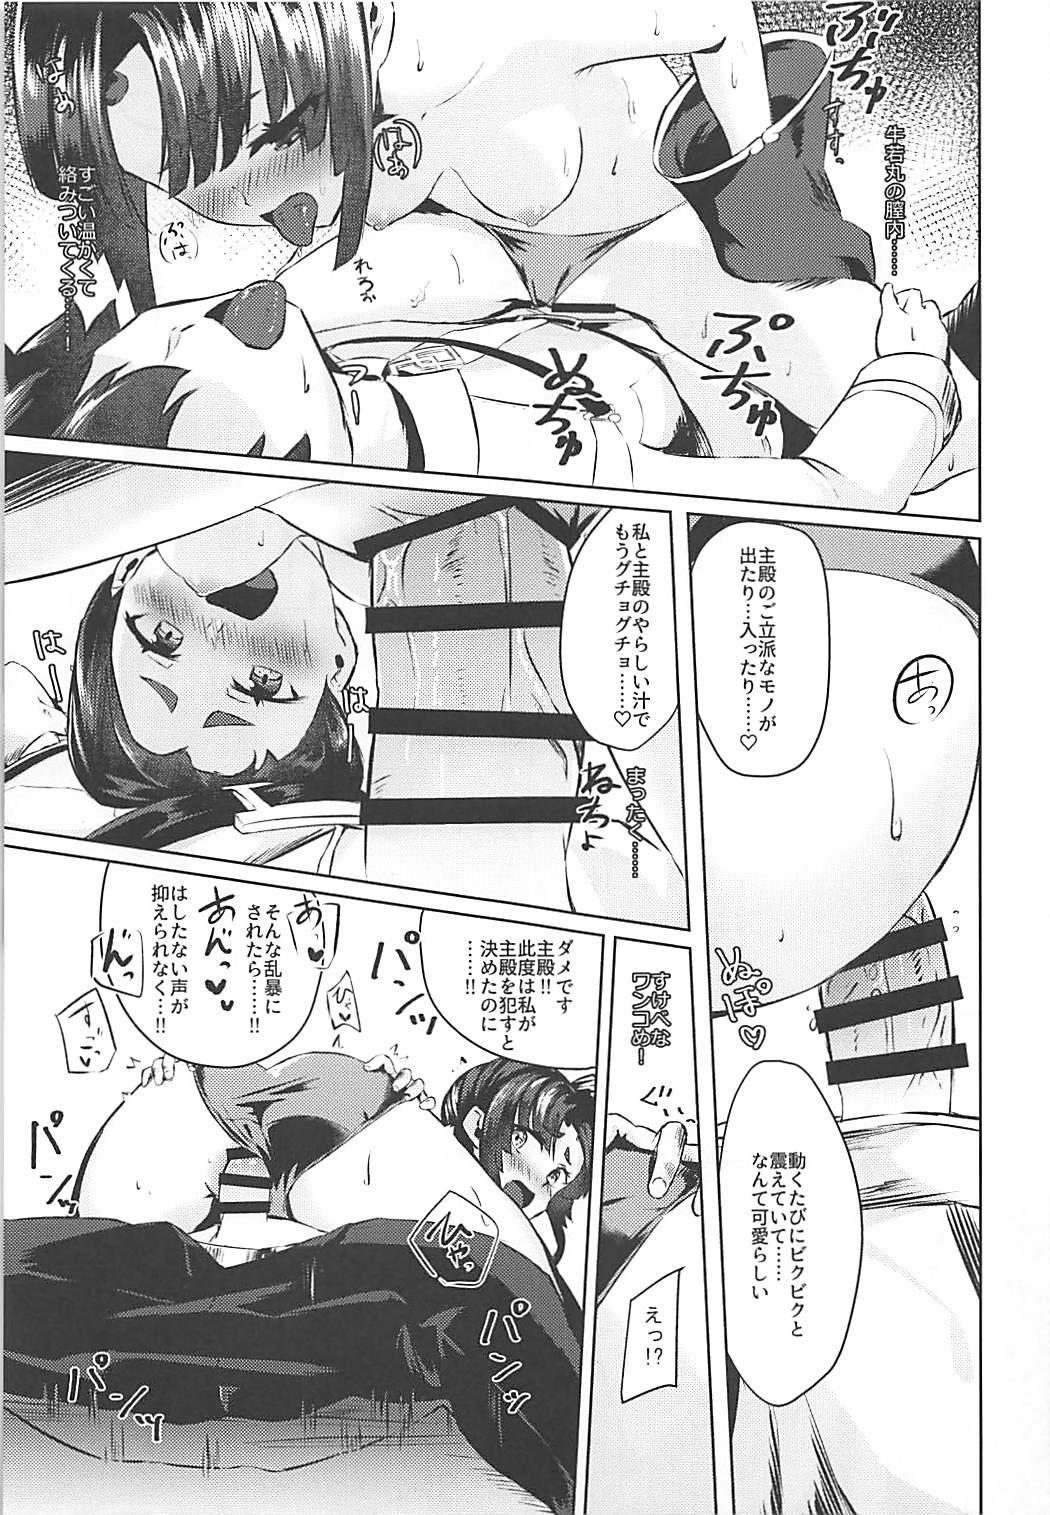 Uncut Ponpokorin - Fate grand order Action - Page 10